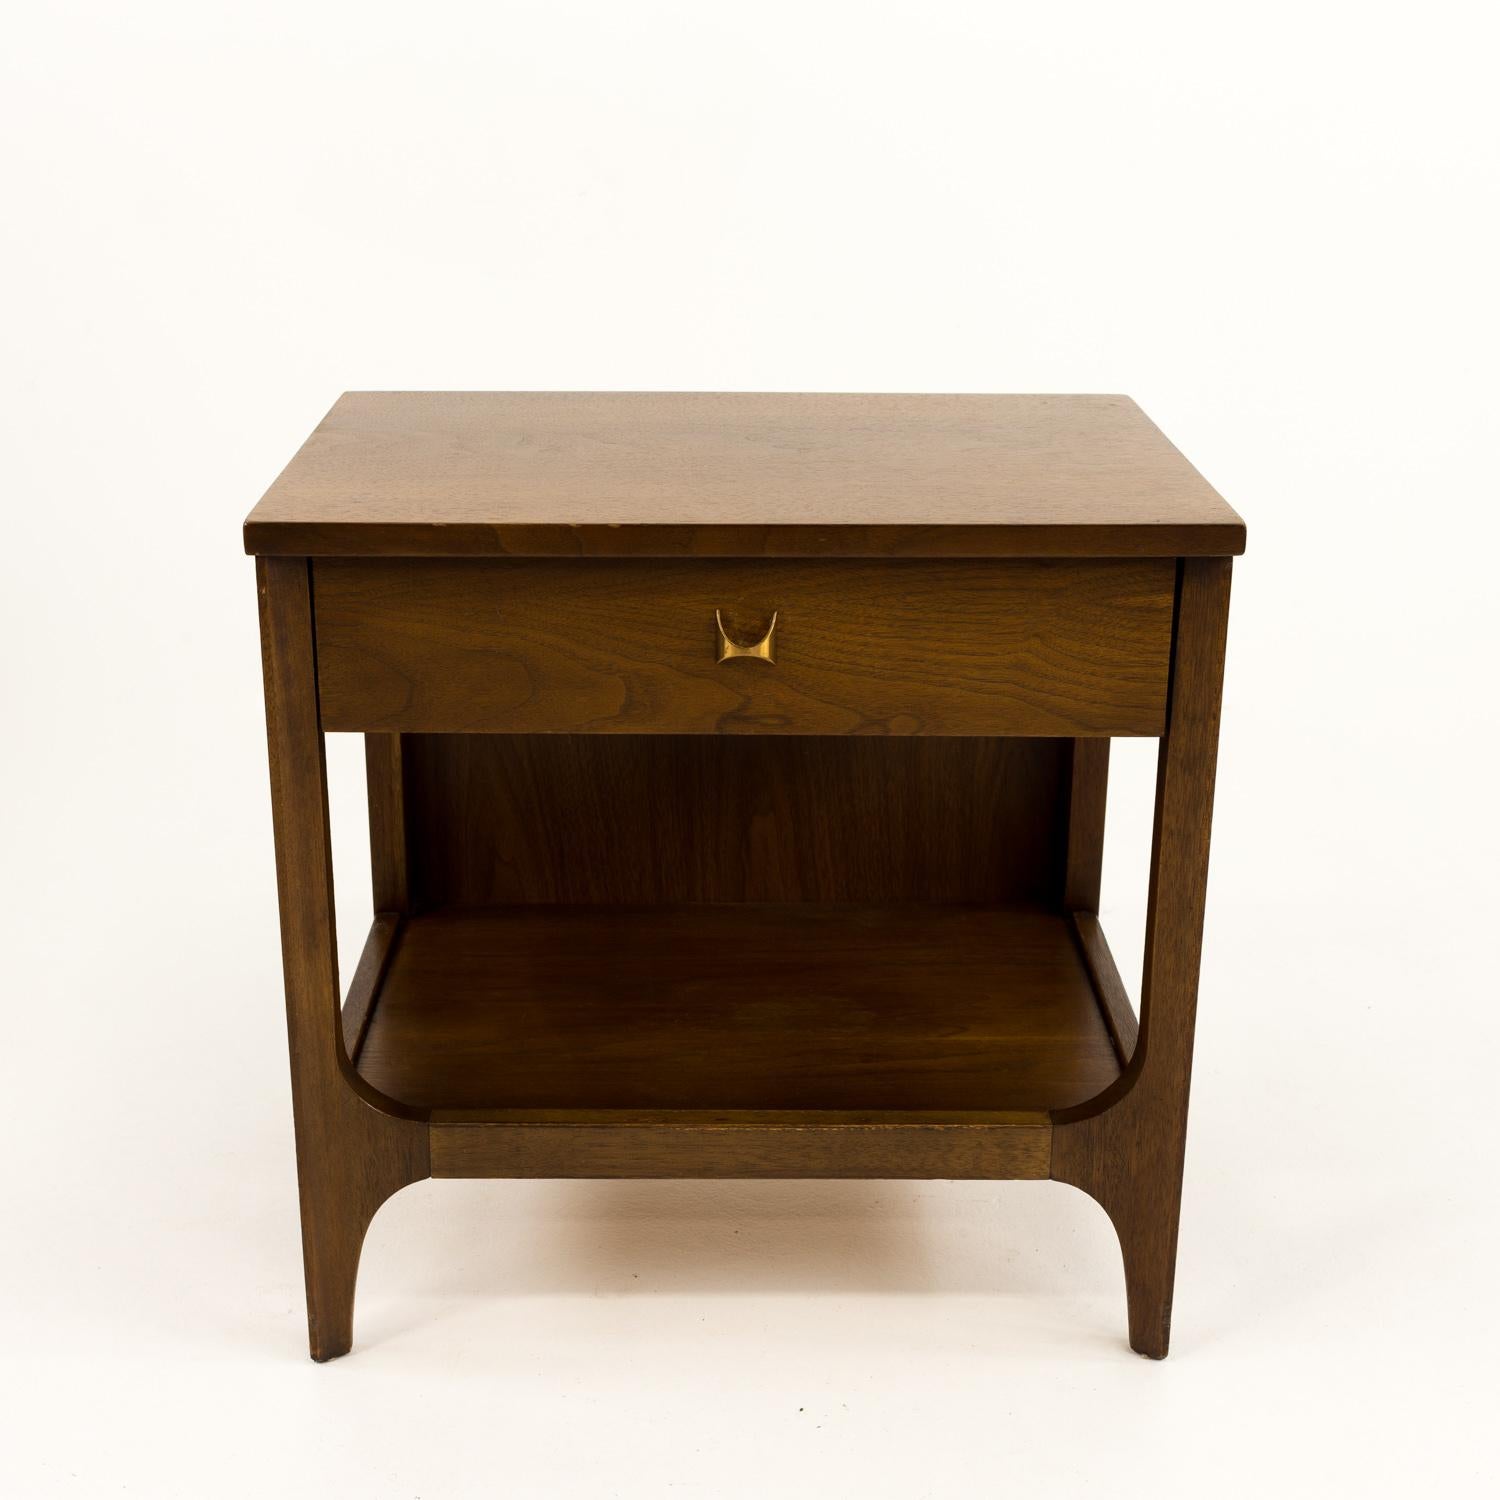 Restored Broyhill Brasilia Mid Century Brutalist Walnut Nightstands - Pair 

Each nightstand measures 22.25 wide x 15 deep x 22.25 high 

All pieces of furniture can be had in what we call Restored Vintage Condition. This means the piece is